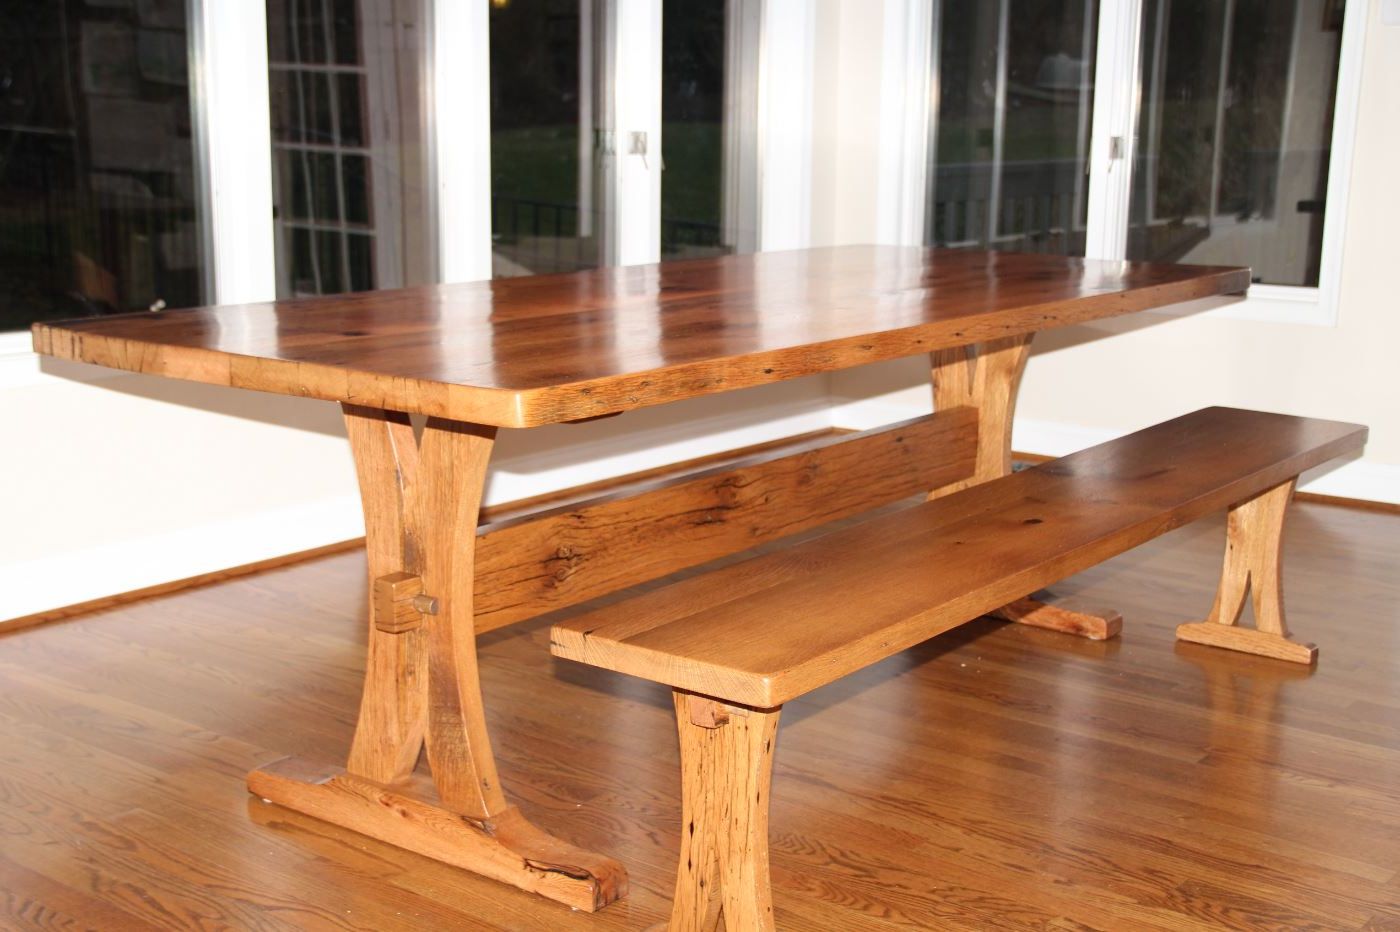 Popular Trestle Tables – Reclaimed Wood Farm Tables In Pertaining To Nerida Trestle Dining Tables (View 6 of 20)